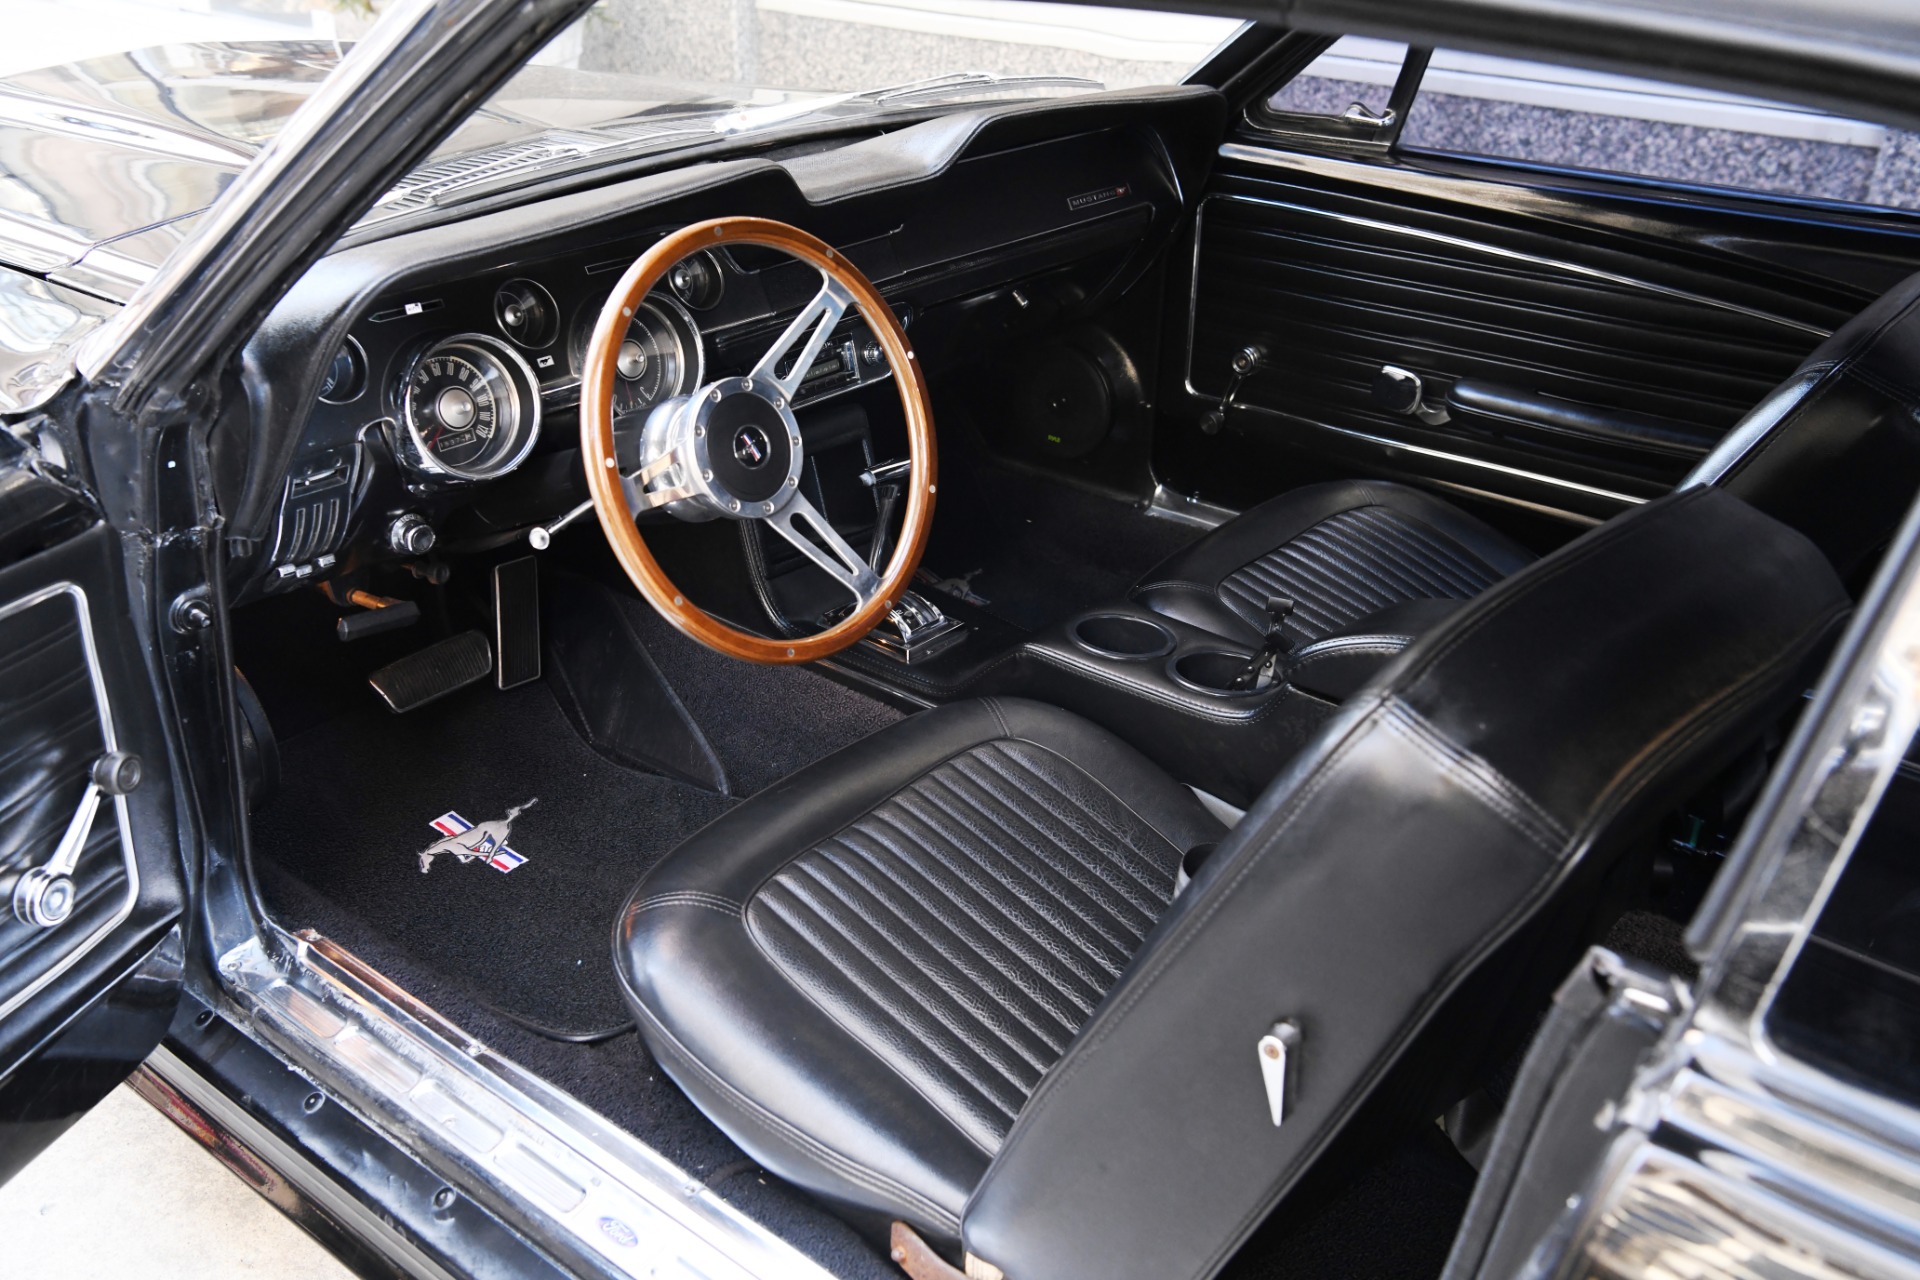 Used 1968 FORD MUSTANG CONV | Chicago, IL